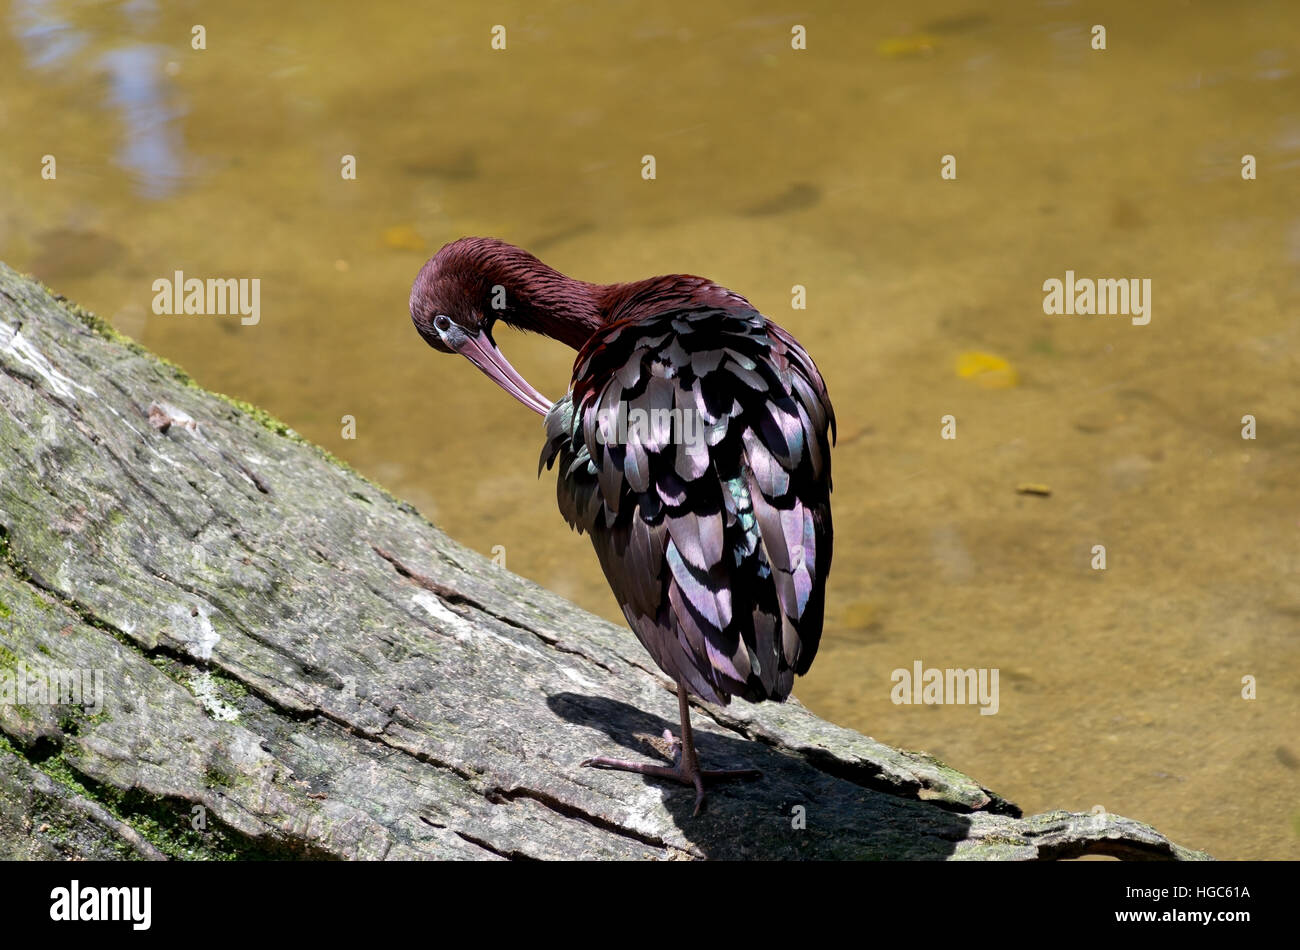 glossy ibis bird or plegadis falcinellus preening while perched on tree beside pond Stock Photo